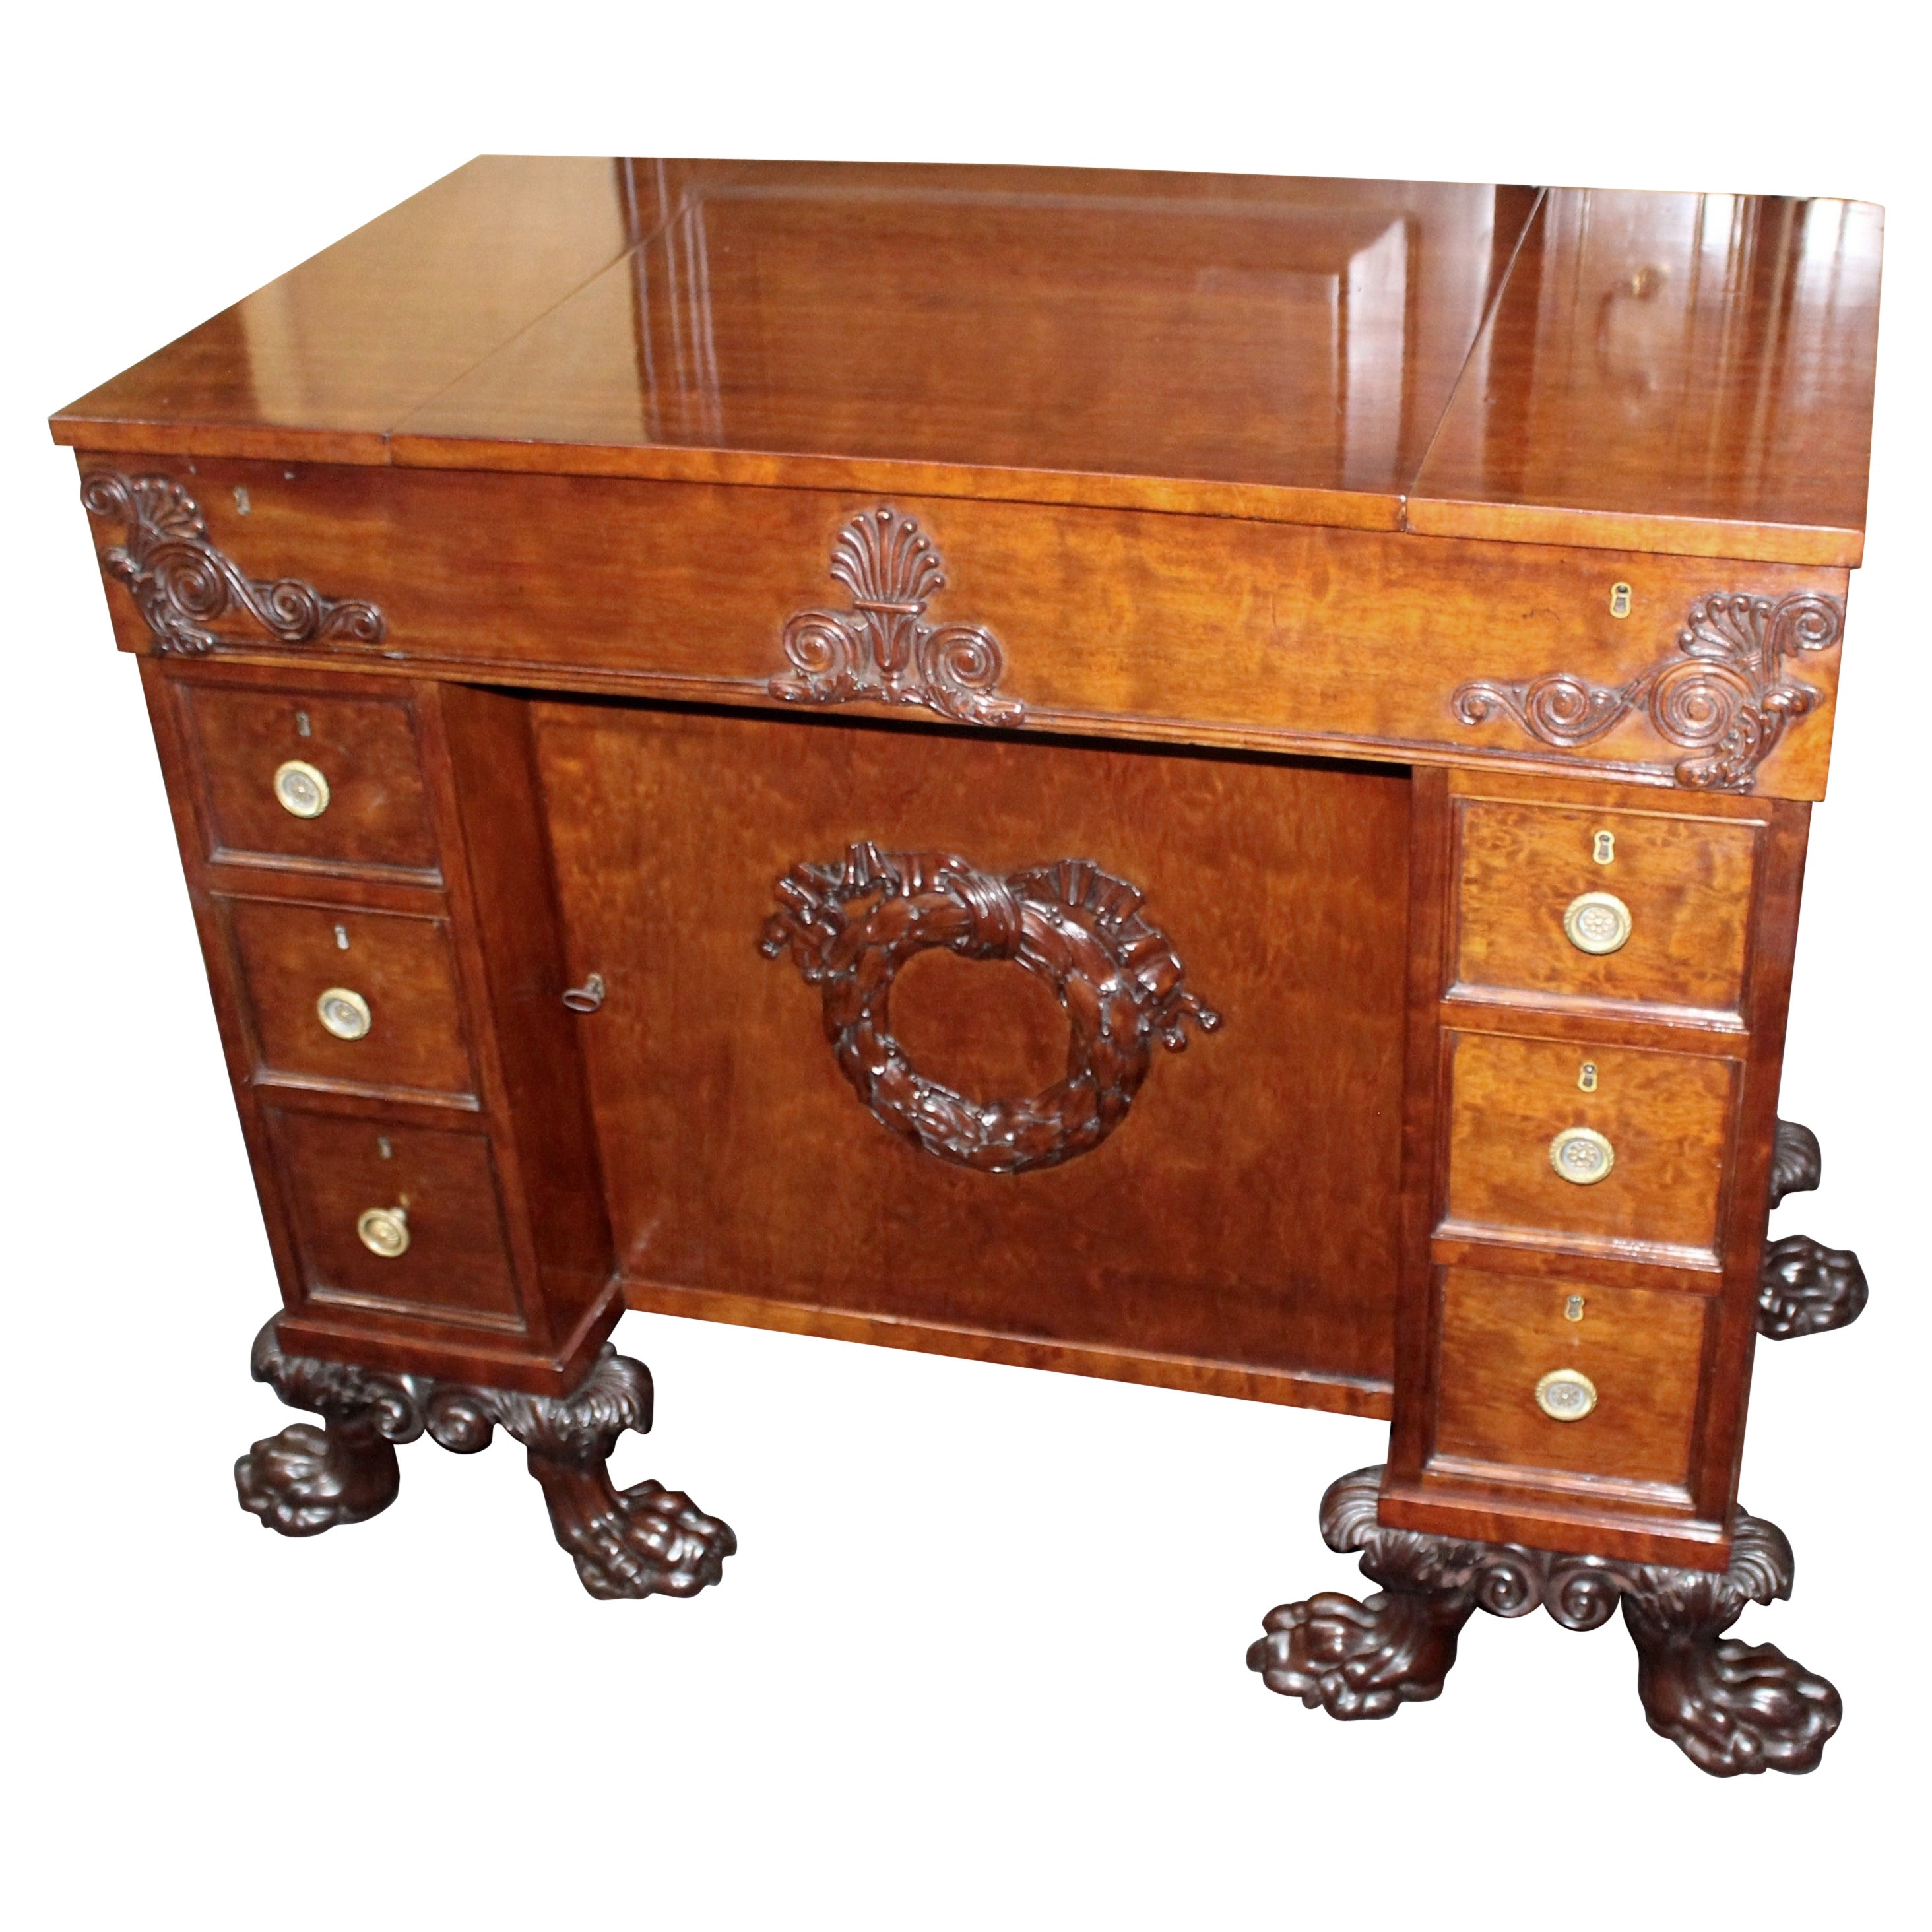 Fine Late 18th c. Mahogany Desk with Carved Feet For Sale